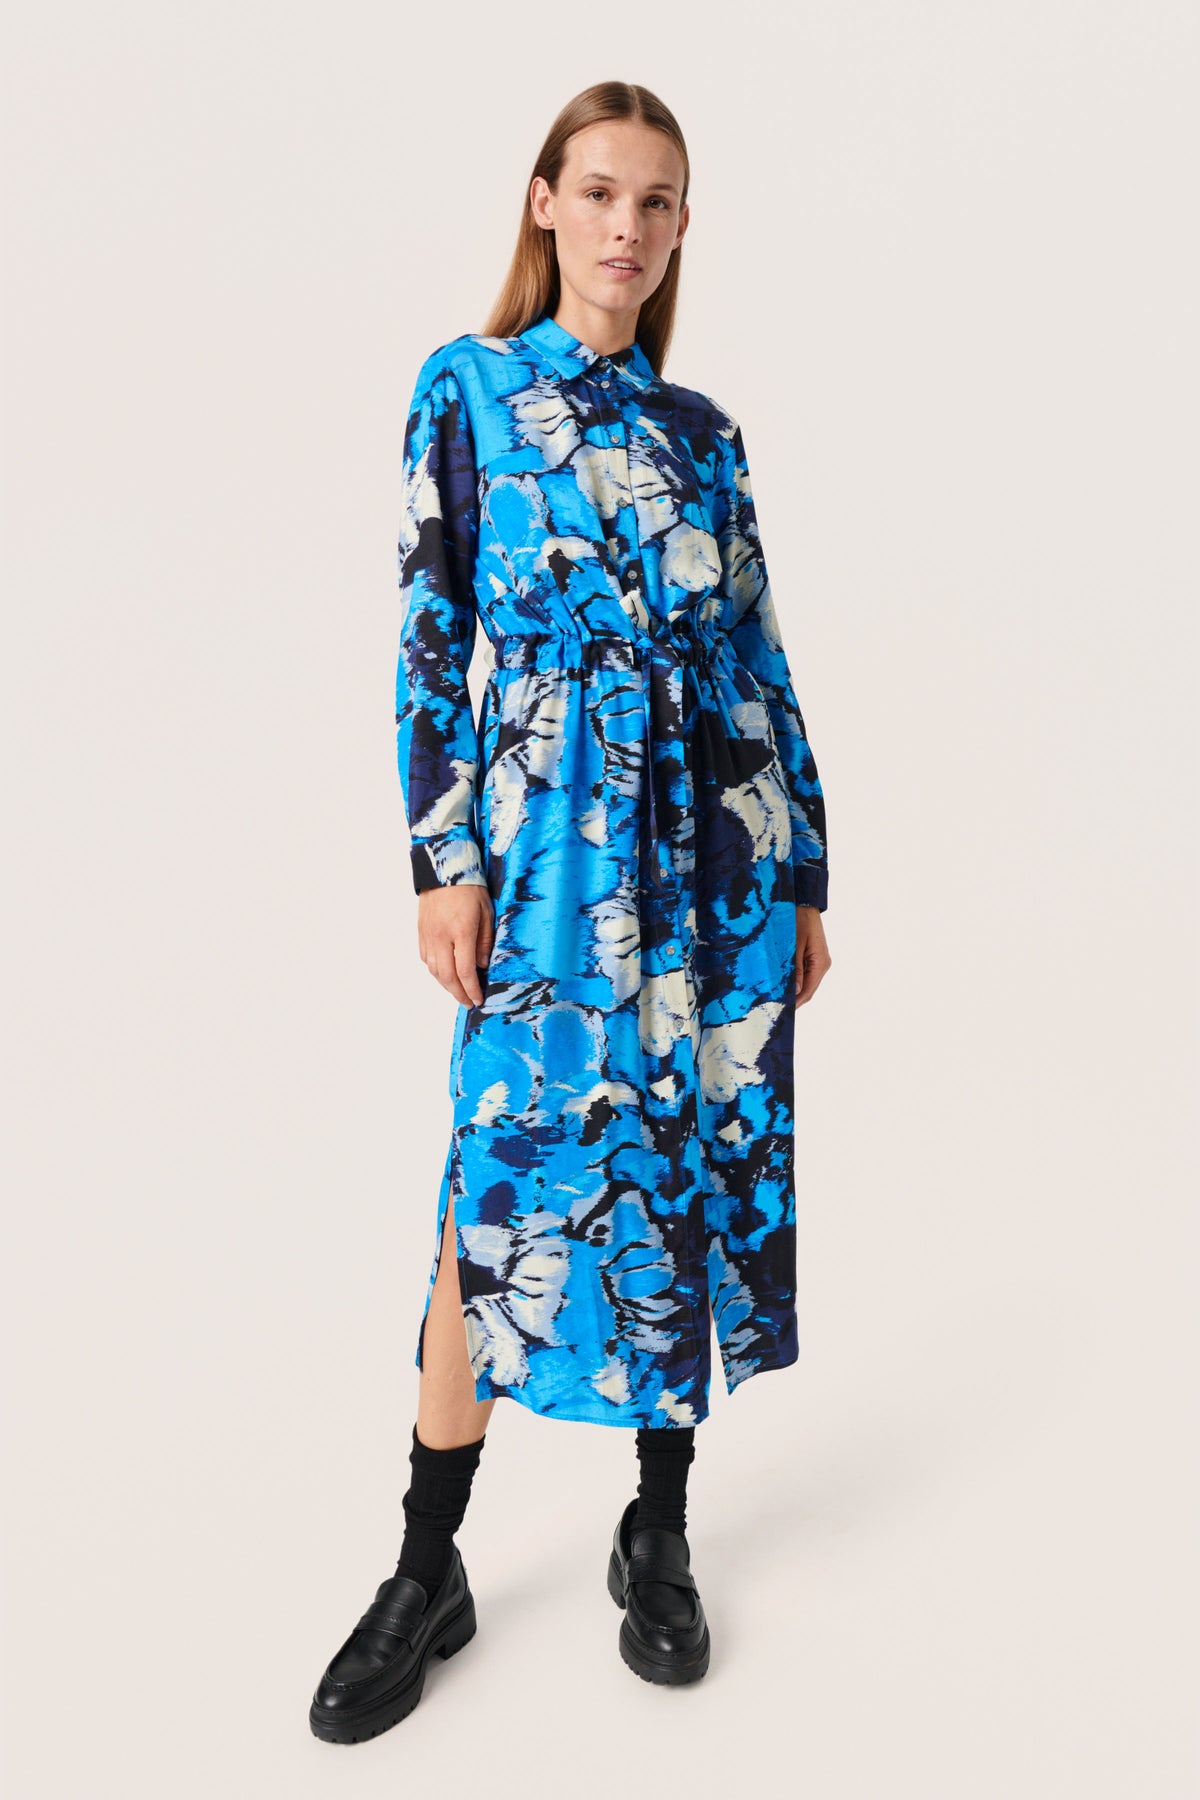 Soaked in Luxury Slmakena Malibu Blue Abstract Floral Printed Shirt Dress, 30407027